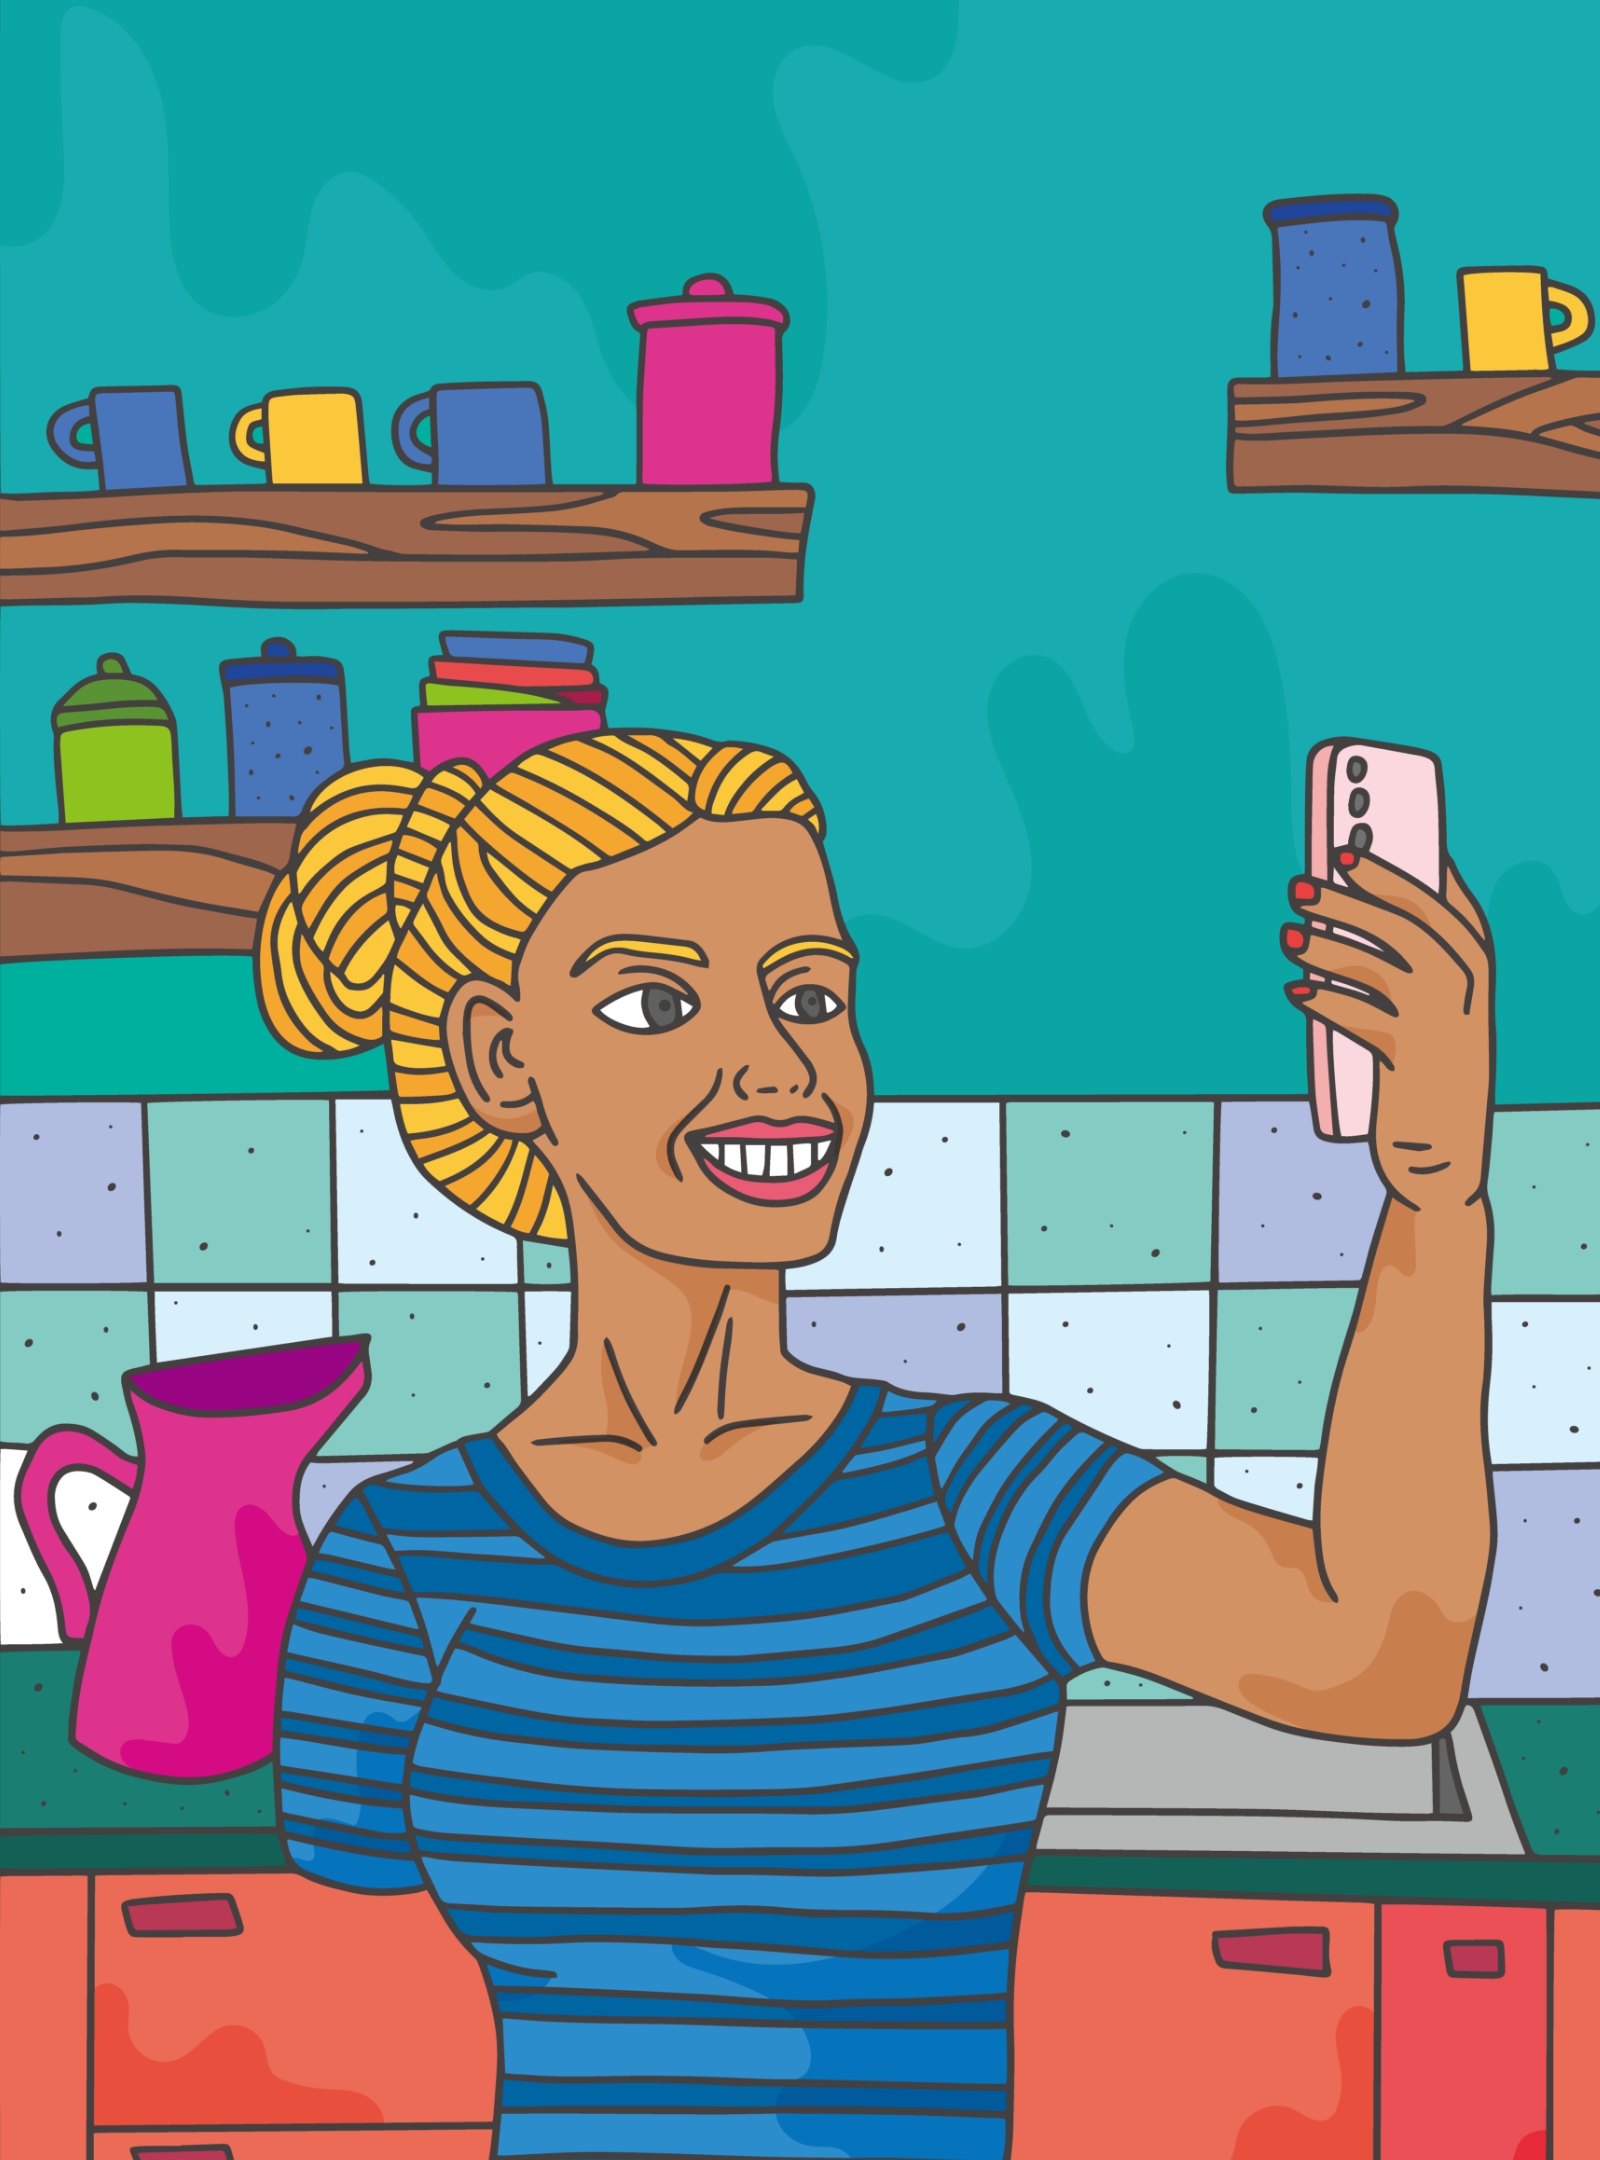 It is an illustration of a person with one arm using the Assistent menu of Samsung mobile products to freely use social media and communicate with people.